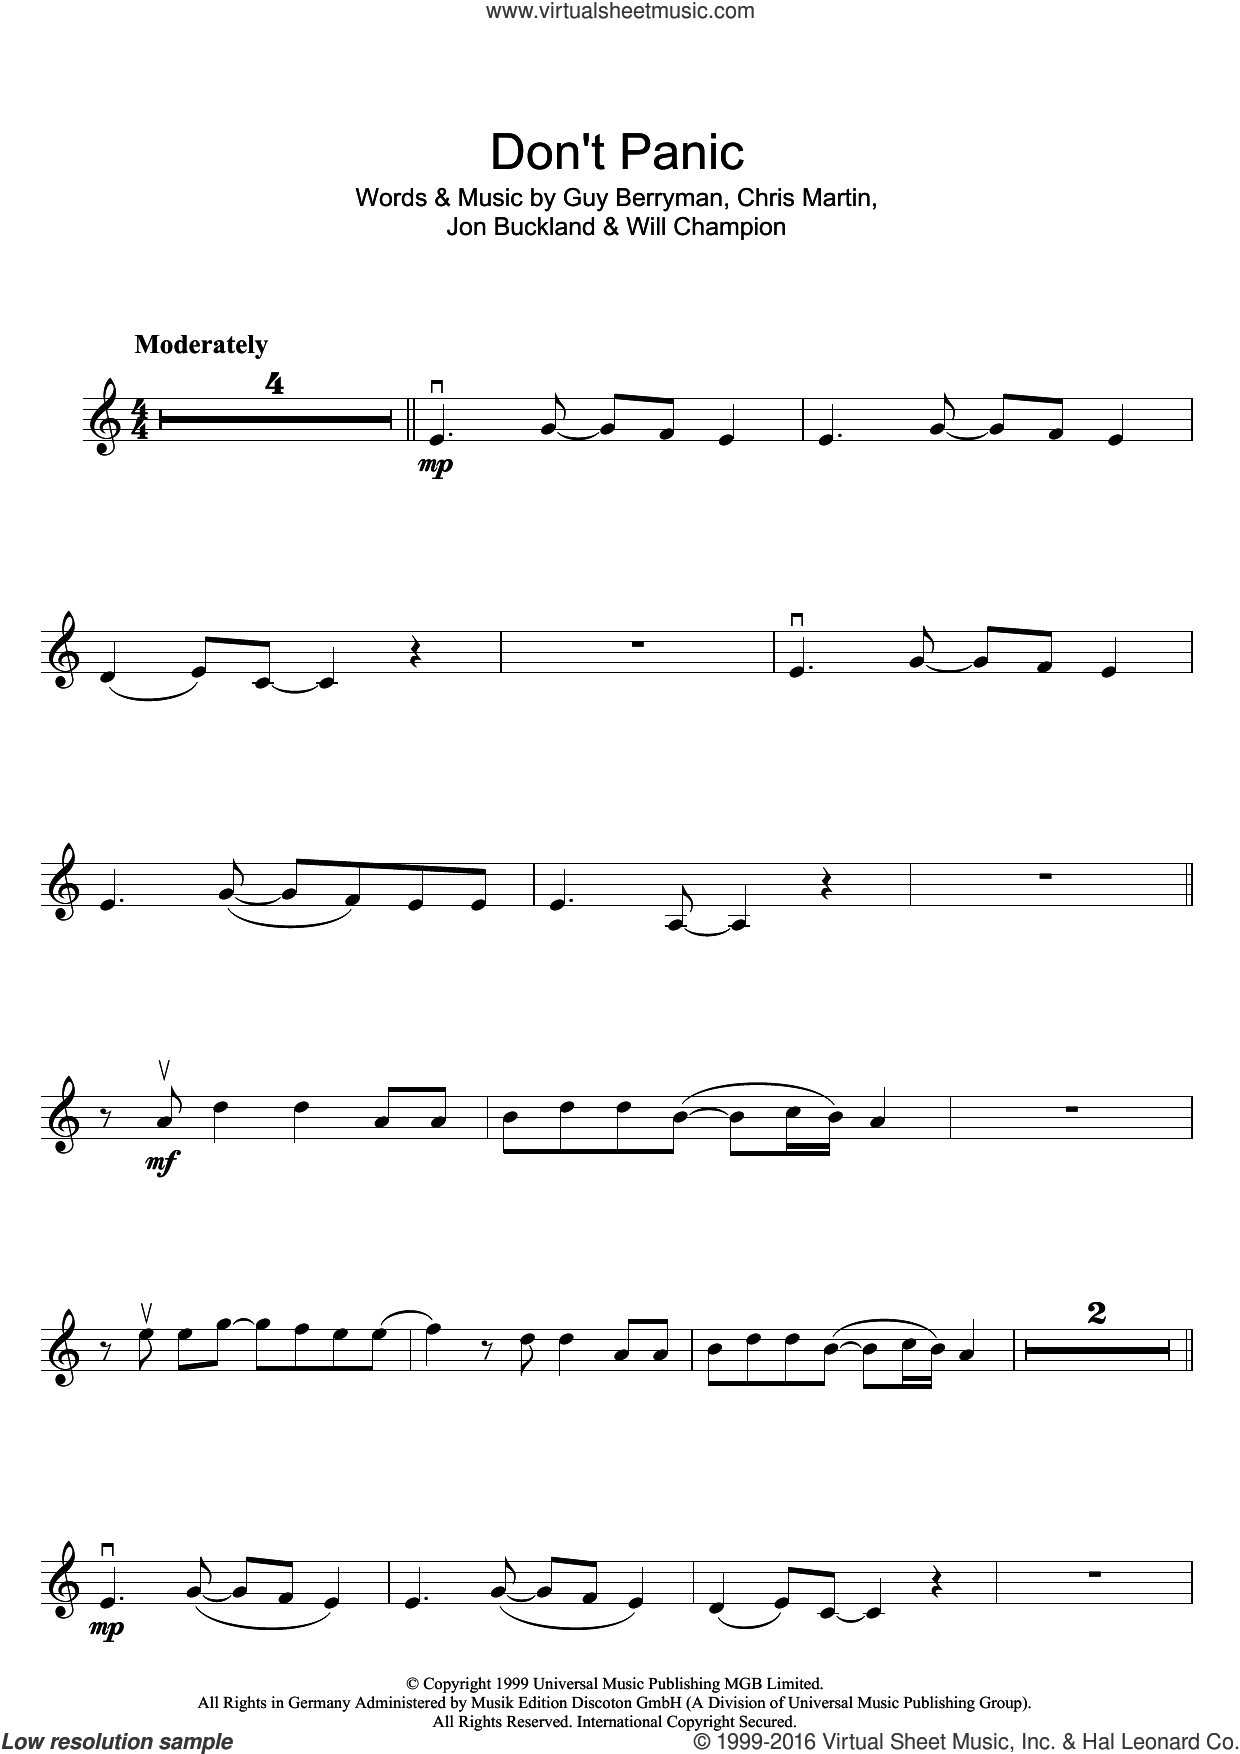 Coldplay - Don't Panic sheet music for violin solo [PDF]